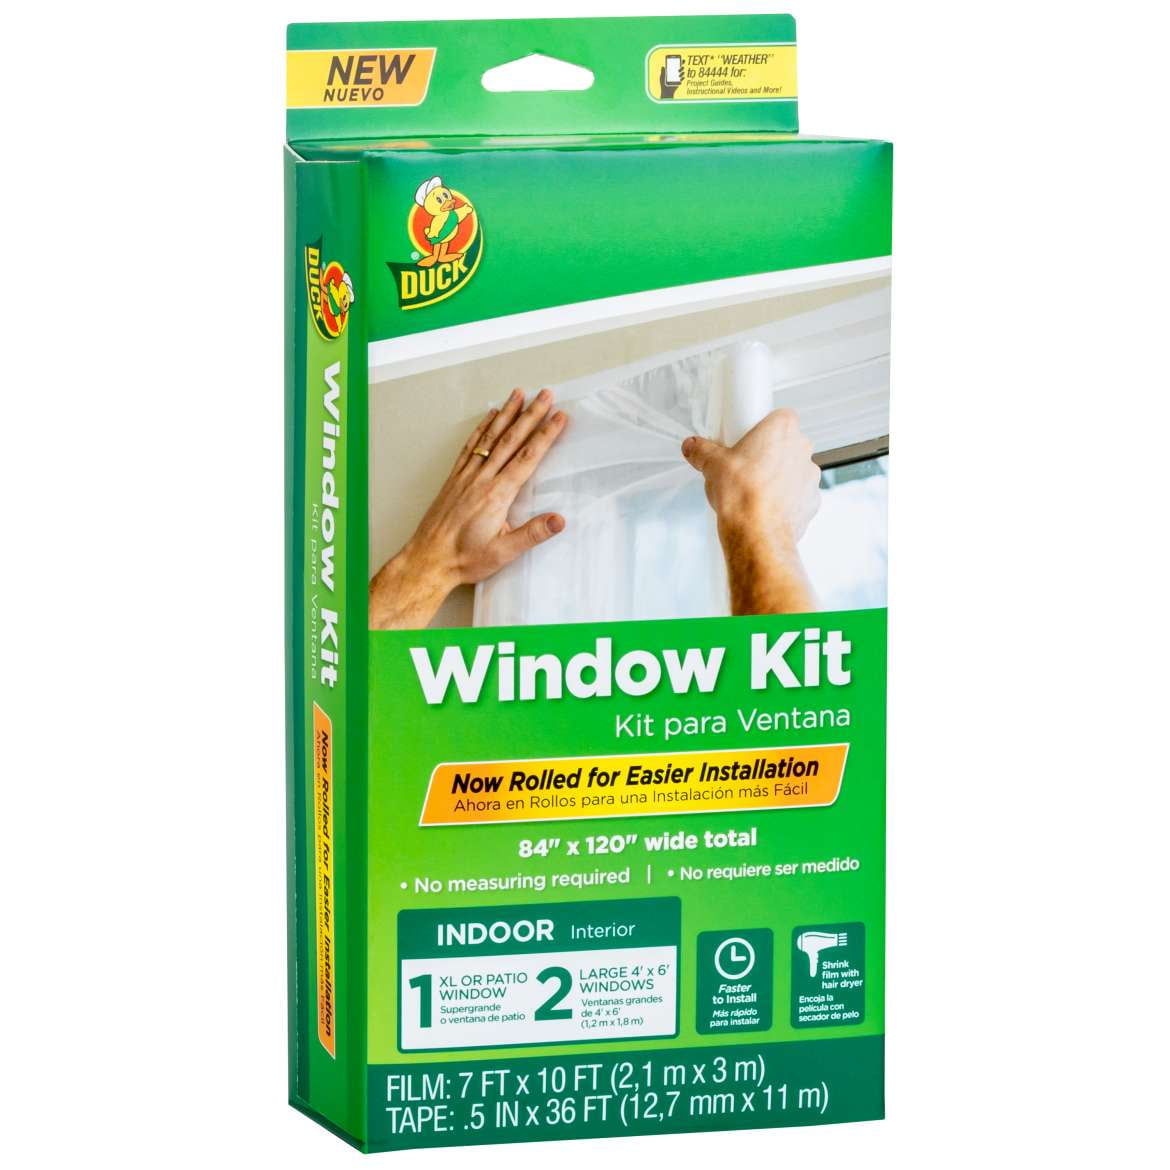 NEW 6 WINDOW INSULATION KIT SHRINK FIT DOUBLE GLAZING FILM DRAUGHT EXCLUDER COLD 